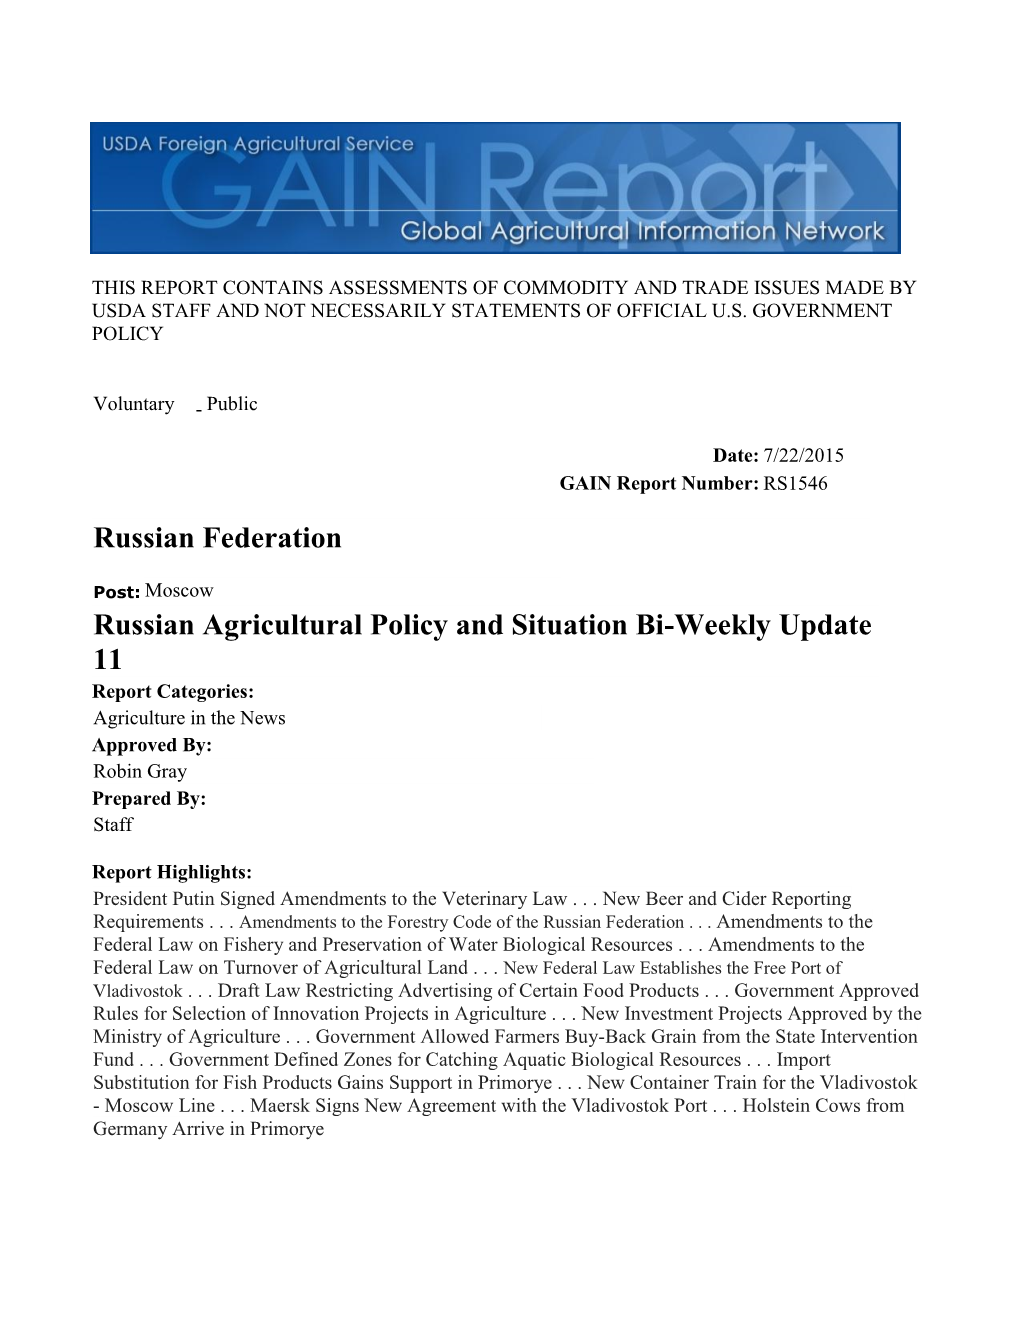 Russian Agricultural Policy and Situation Bi-Weekly Update